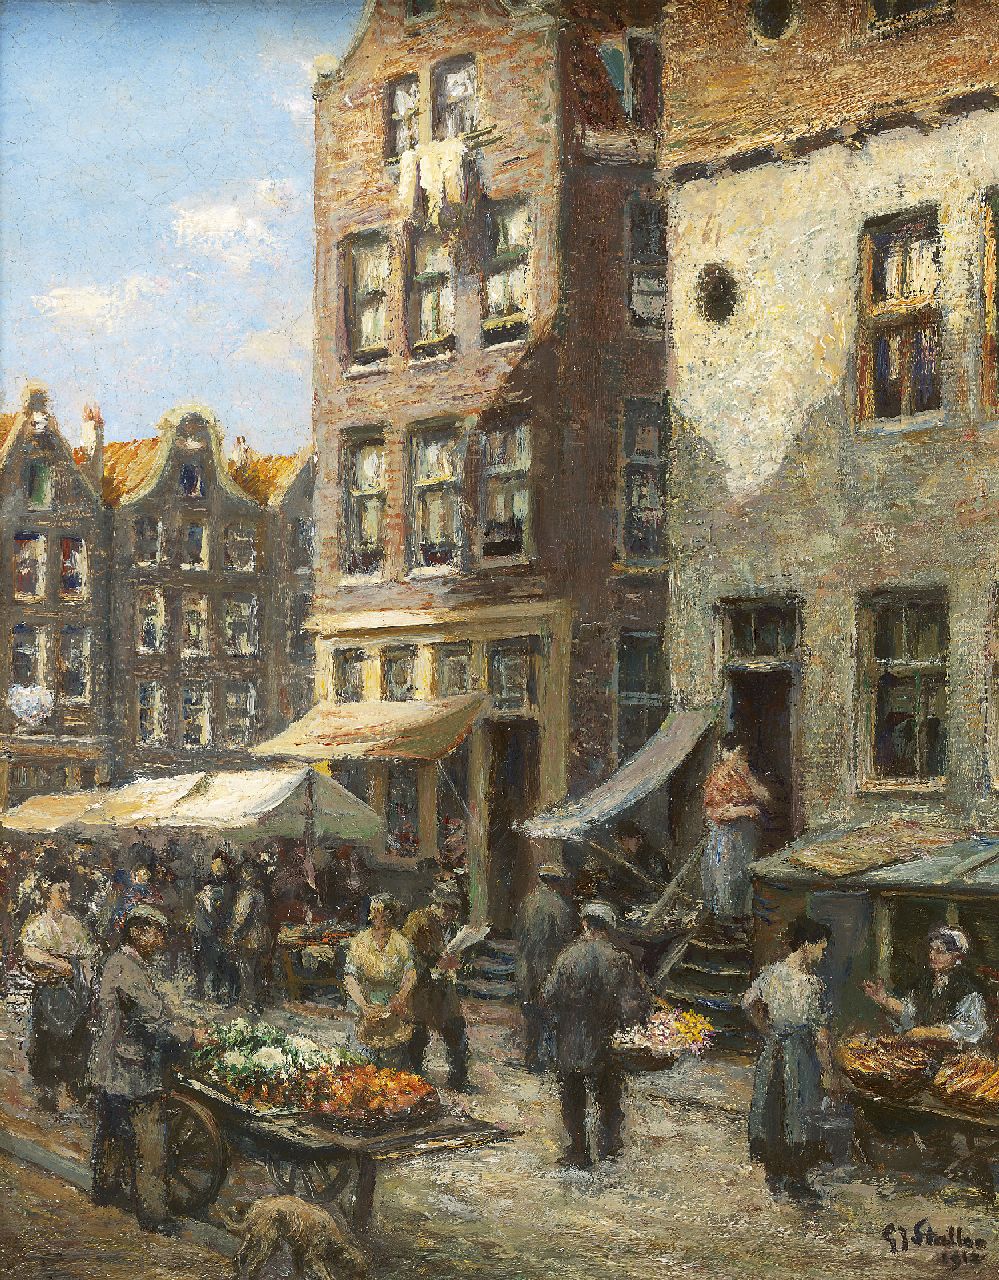 Staller G.J.  | Gerard Johan Staller, Busy markt scene, Amsterdam, oil on canvas laid down on panel 23.6 x 18.4 cm, signed l.r. and dated 1912